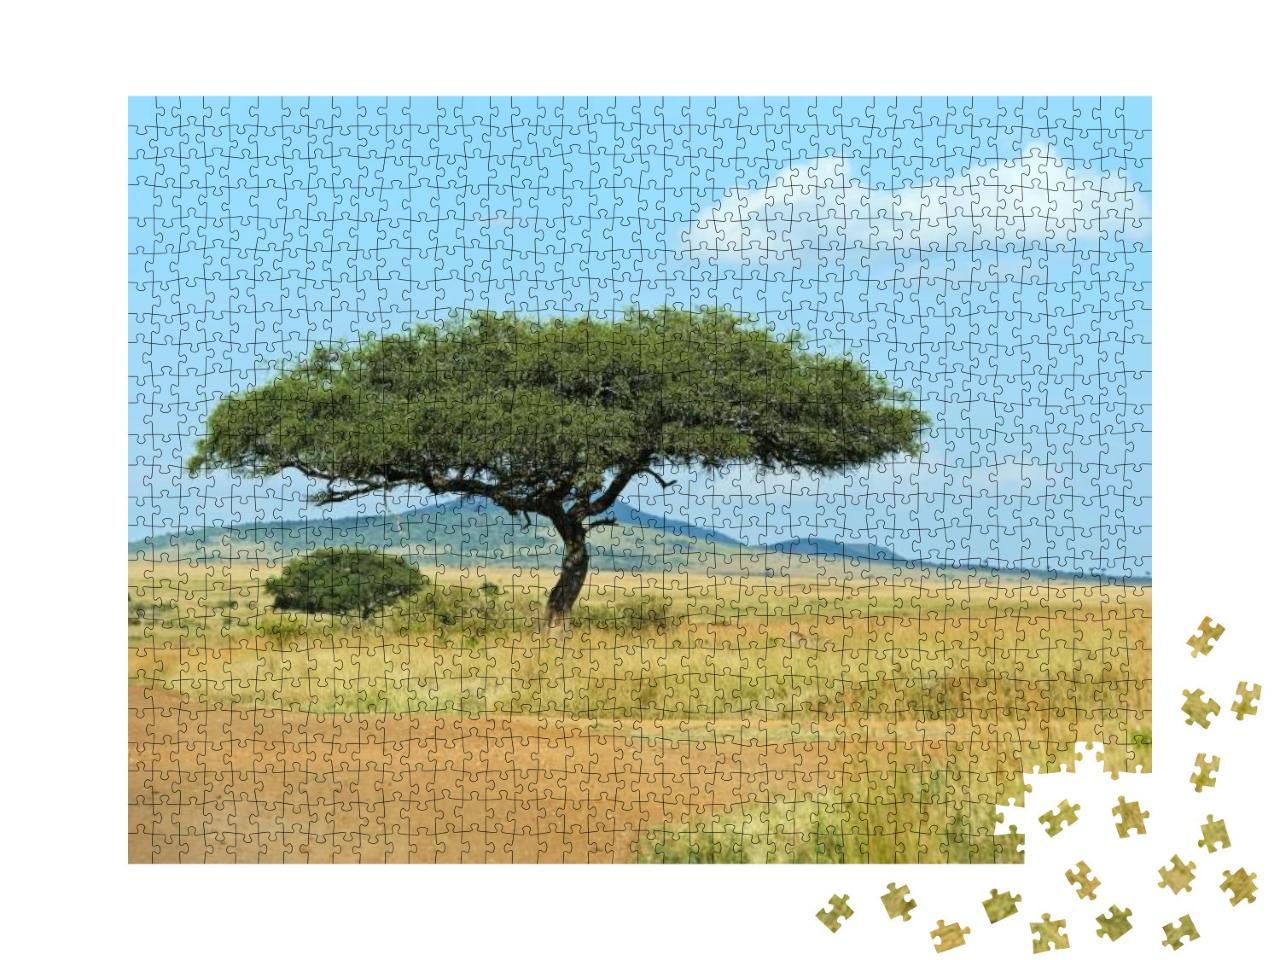 Large Acacia Tree in the Open Savanna Plains of East Afri... Jigsaw Puzzle with 1000 pieces